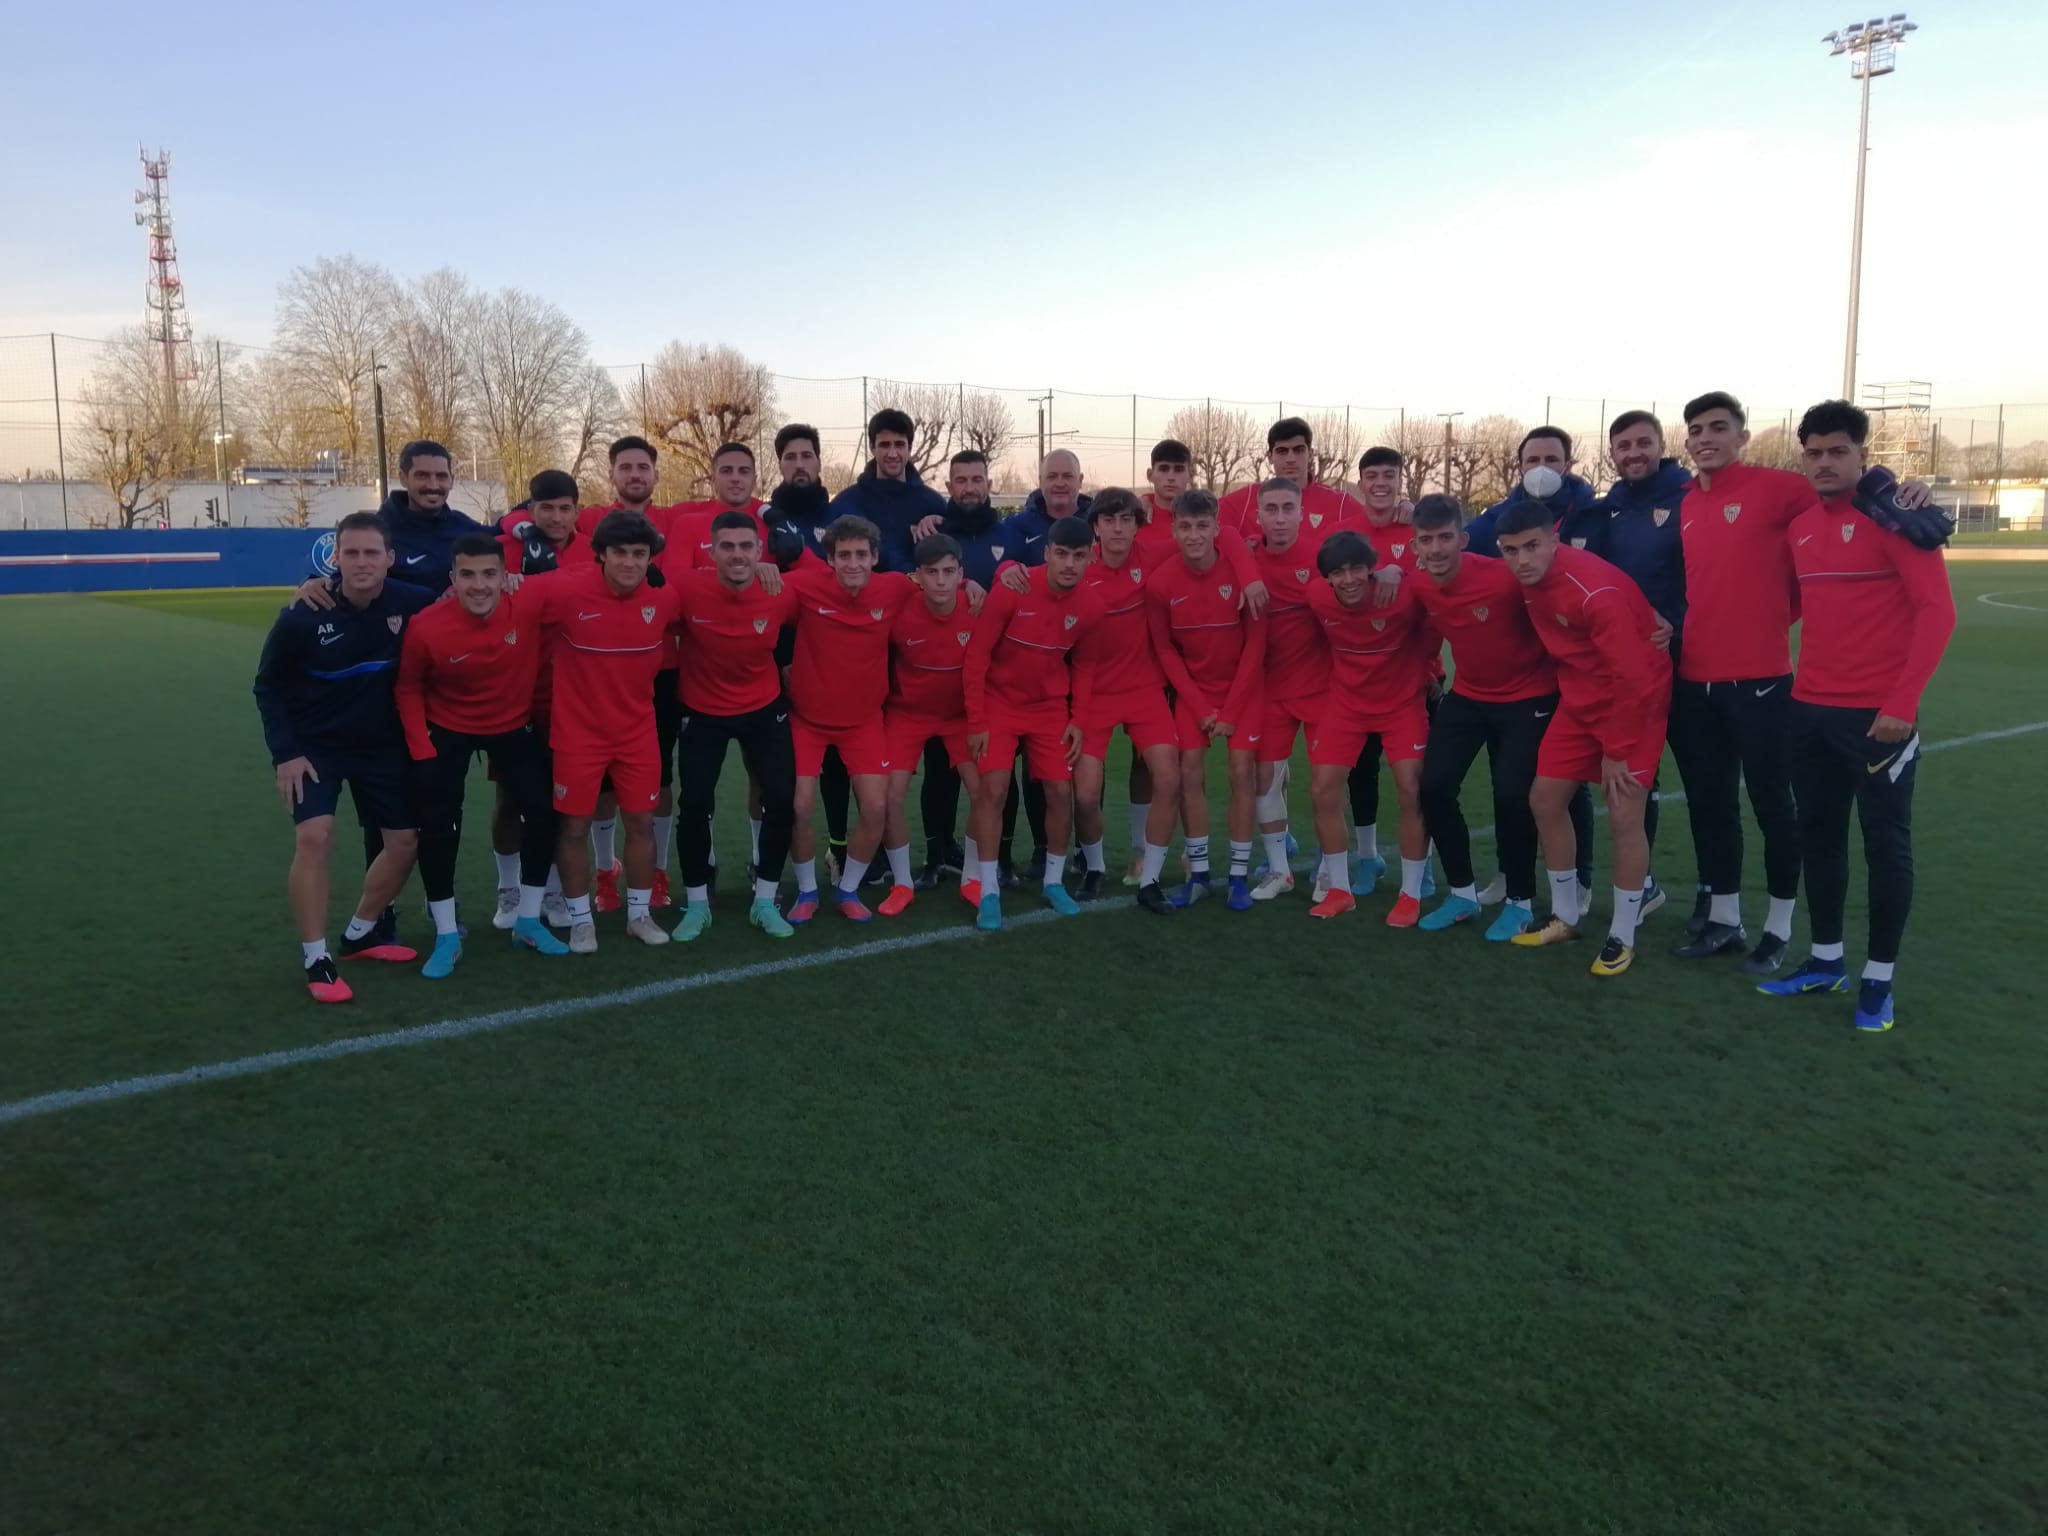 The U19s pose for a photo at the PSG training ground 